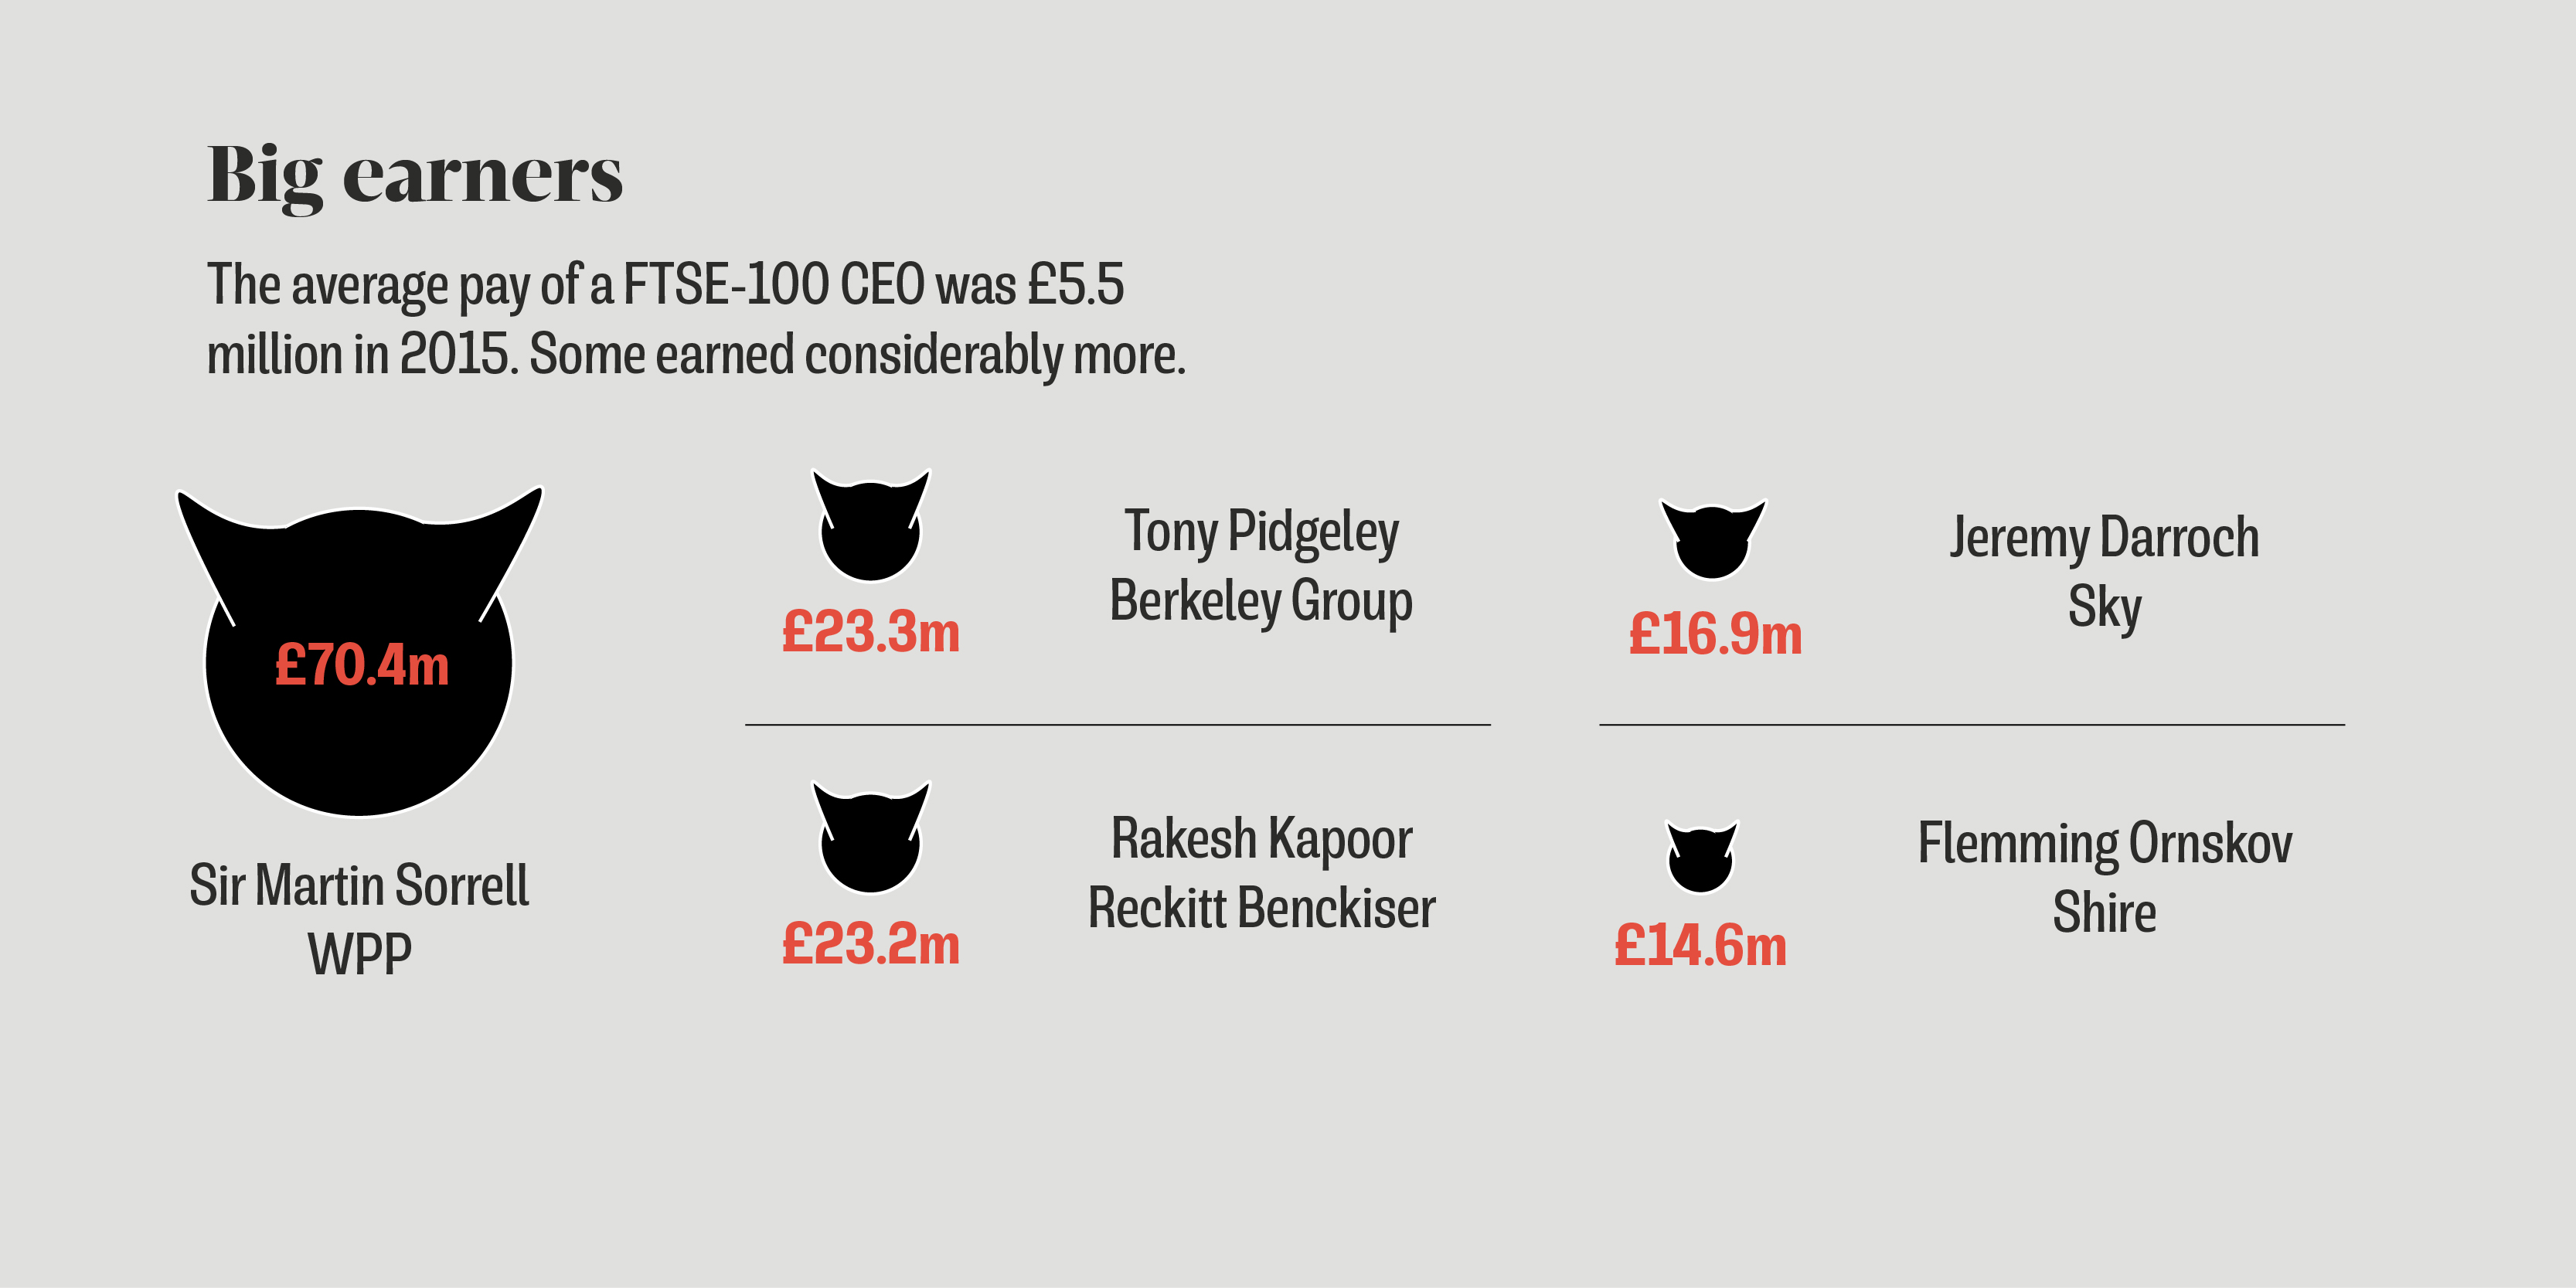 The average pay of FTSE 100 CEO was £5.5 million